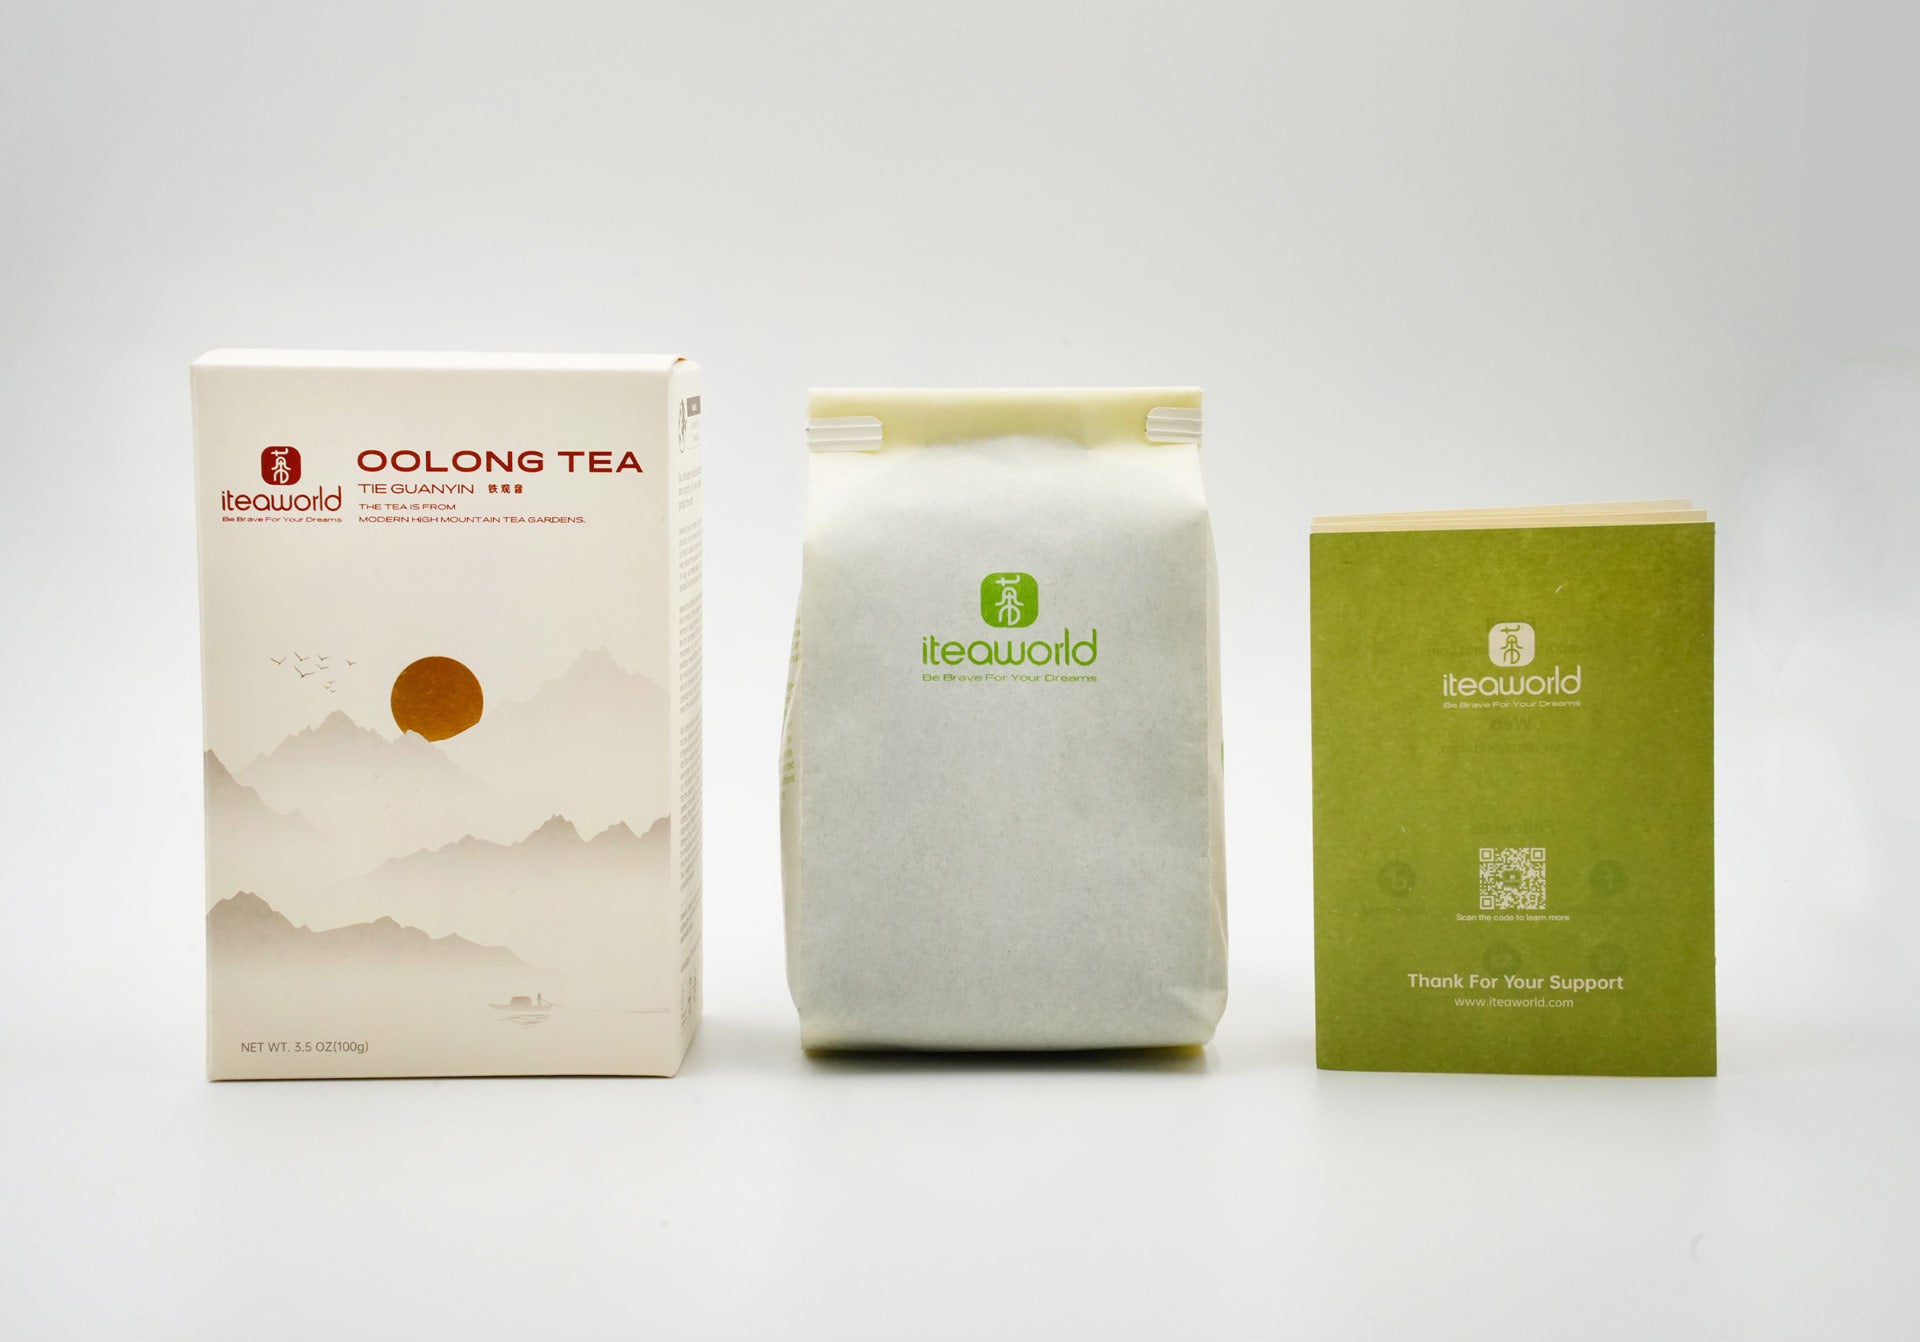 Product-Packaging-Adhering-to-Sustainability-tieguanyin